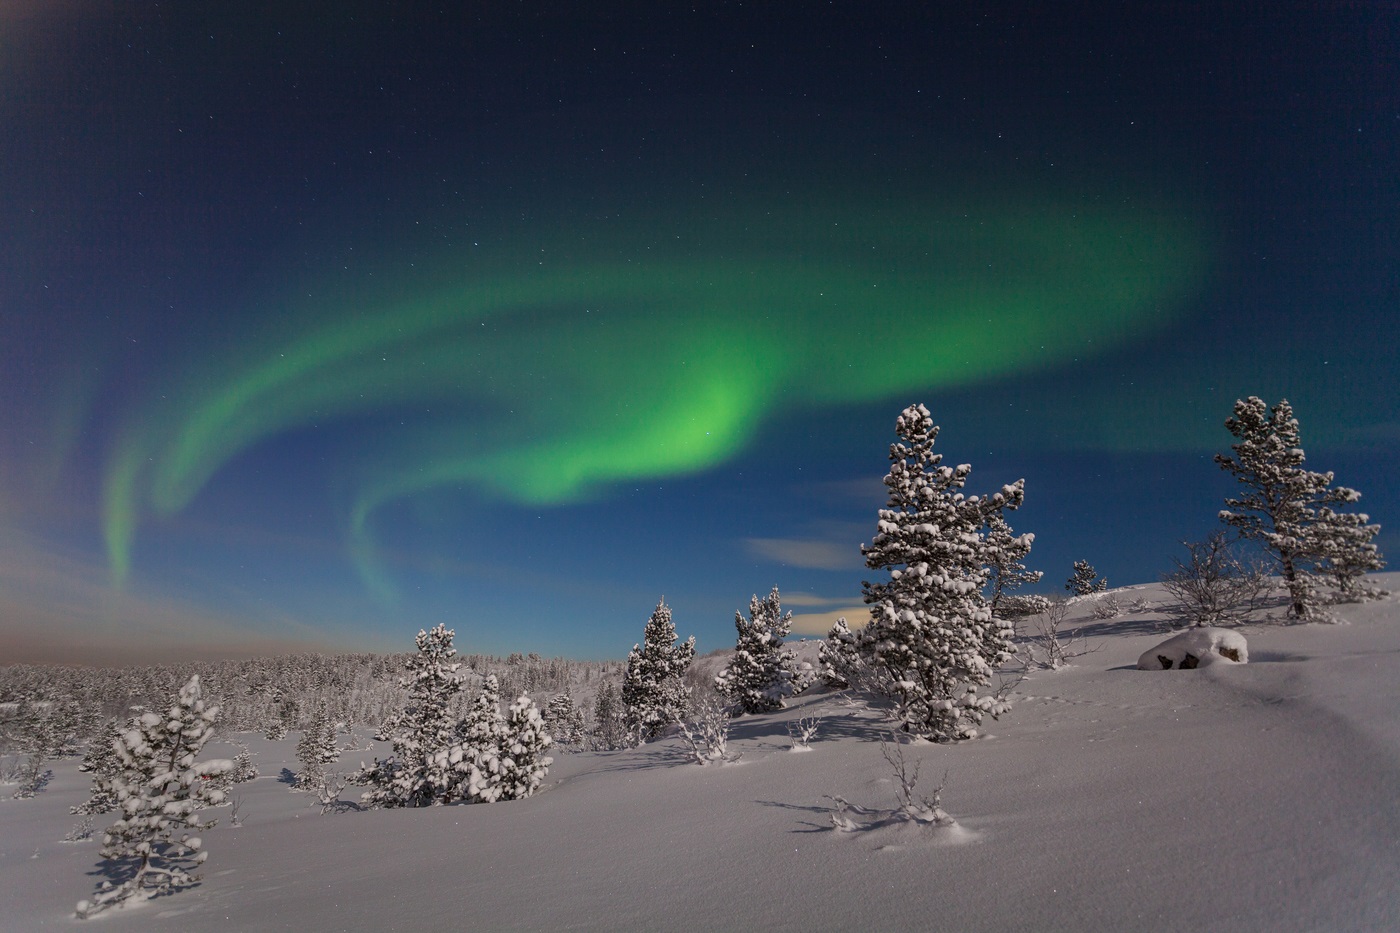 Beautiful photo of the northern lights in winter